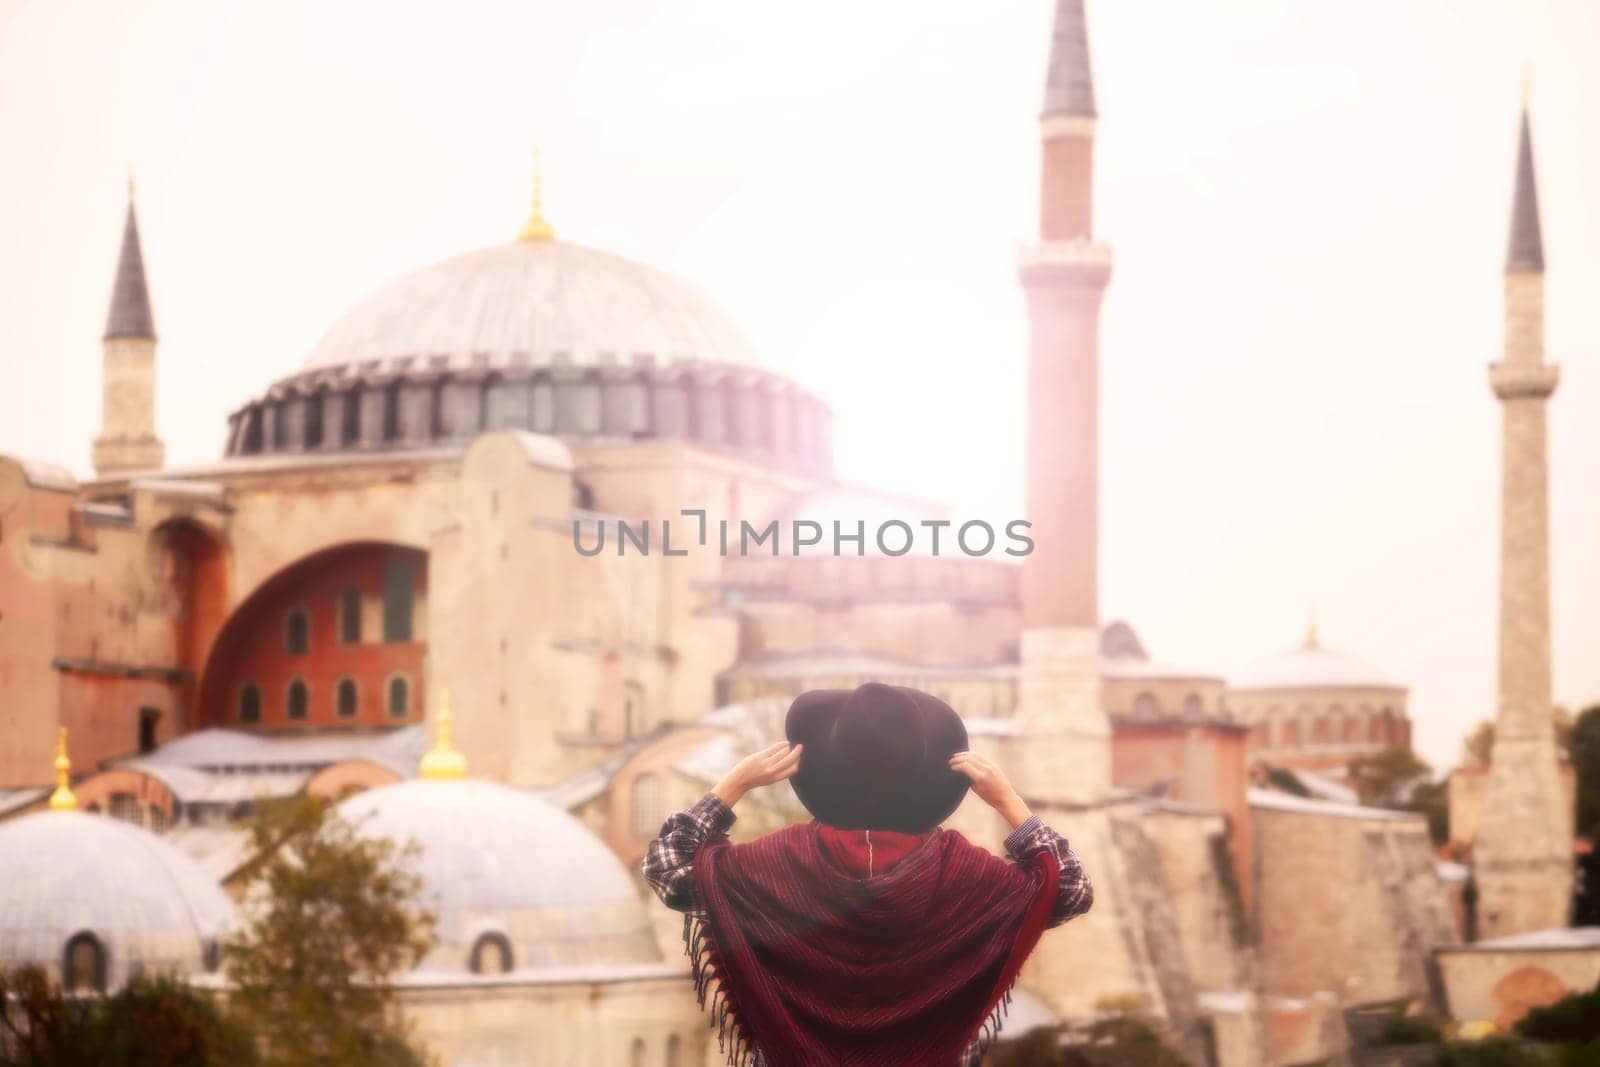 A young pretty girl in a stylish hat and a plaid shirt poses, makes a selfie on the phone next to the Hagia Sophia mosque. Tourism in Istanbul, Turkey.